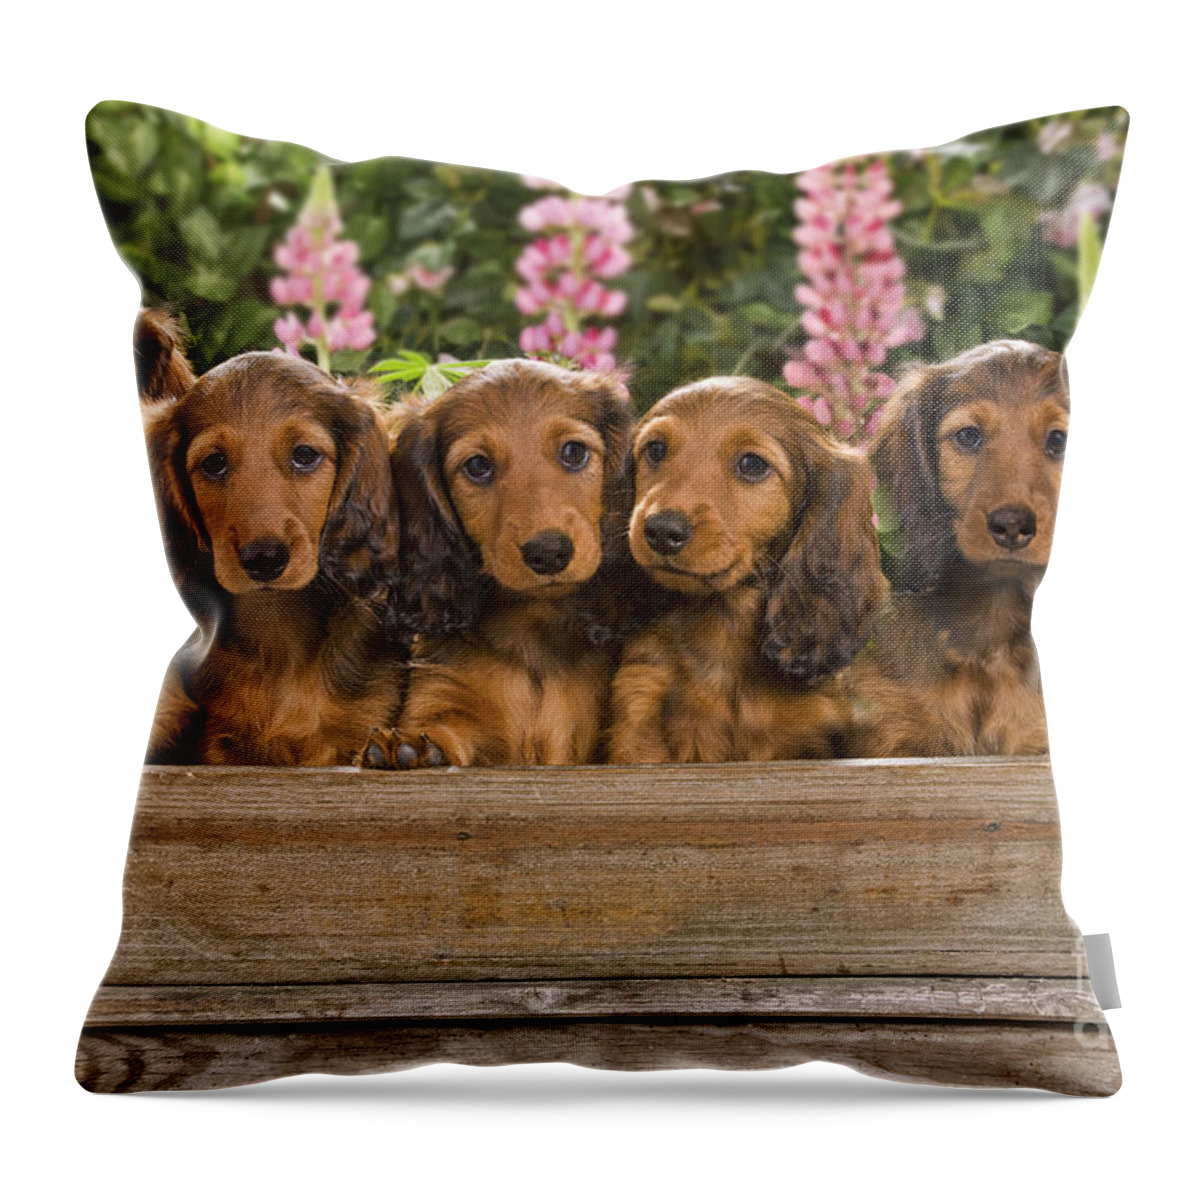 Dachshund Throw Pillow featuring the photograph Dachshunds In A Flowerpot by Jean-Michel Labat